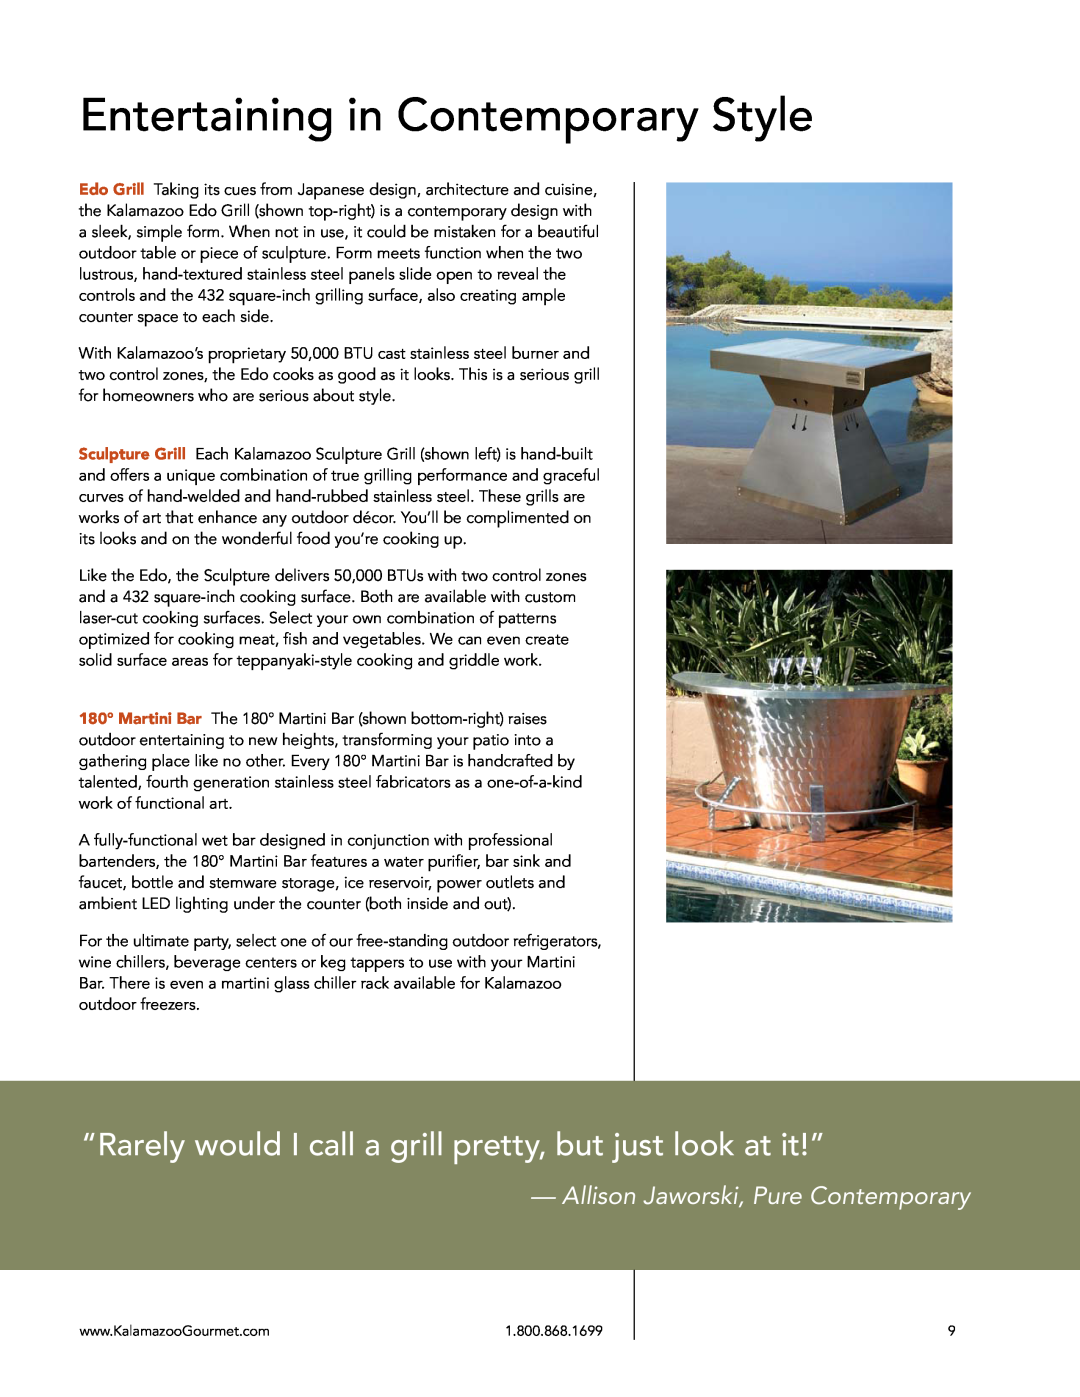 Kalamazoo Outdoor Gourmet Grill manual Entertaining in Contemporary Style, Allison Jaworski, Pure Contemporary 